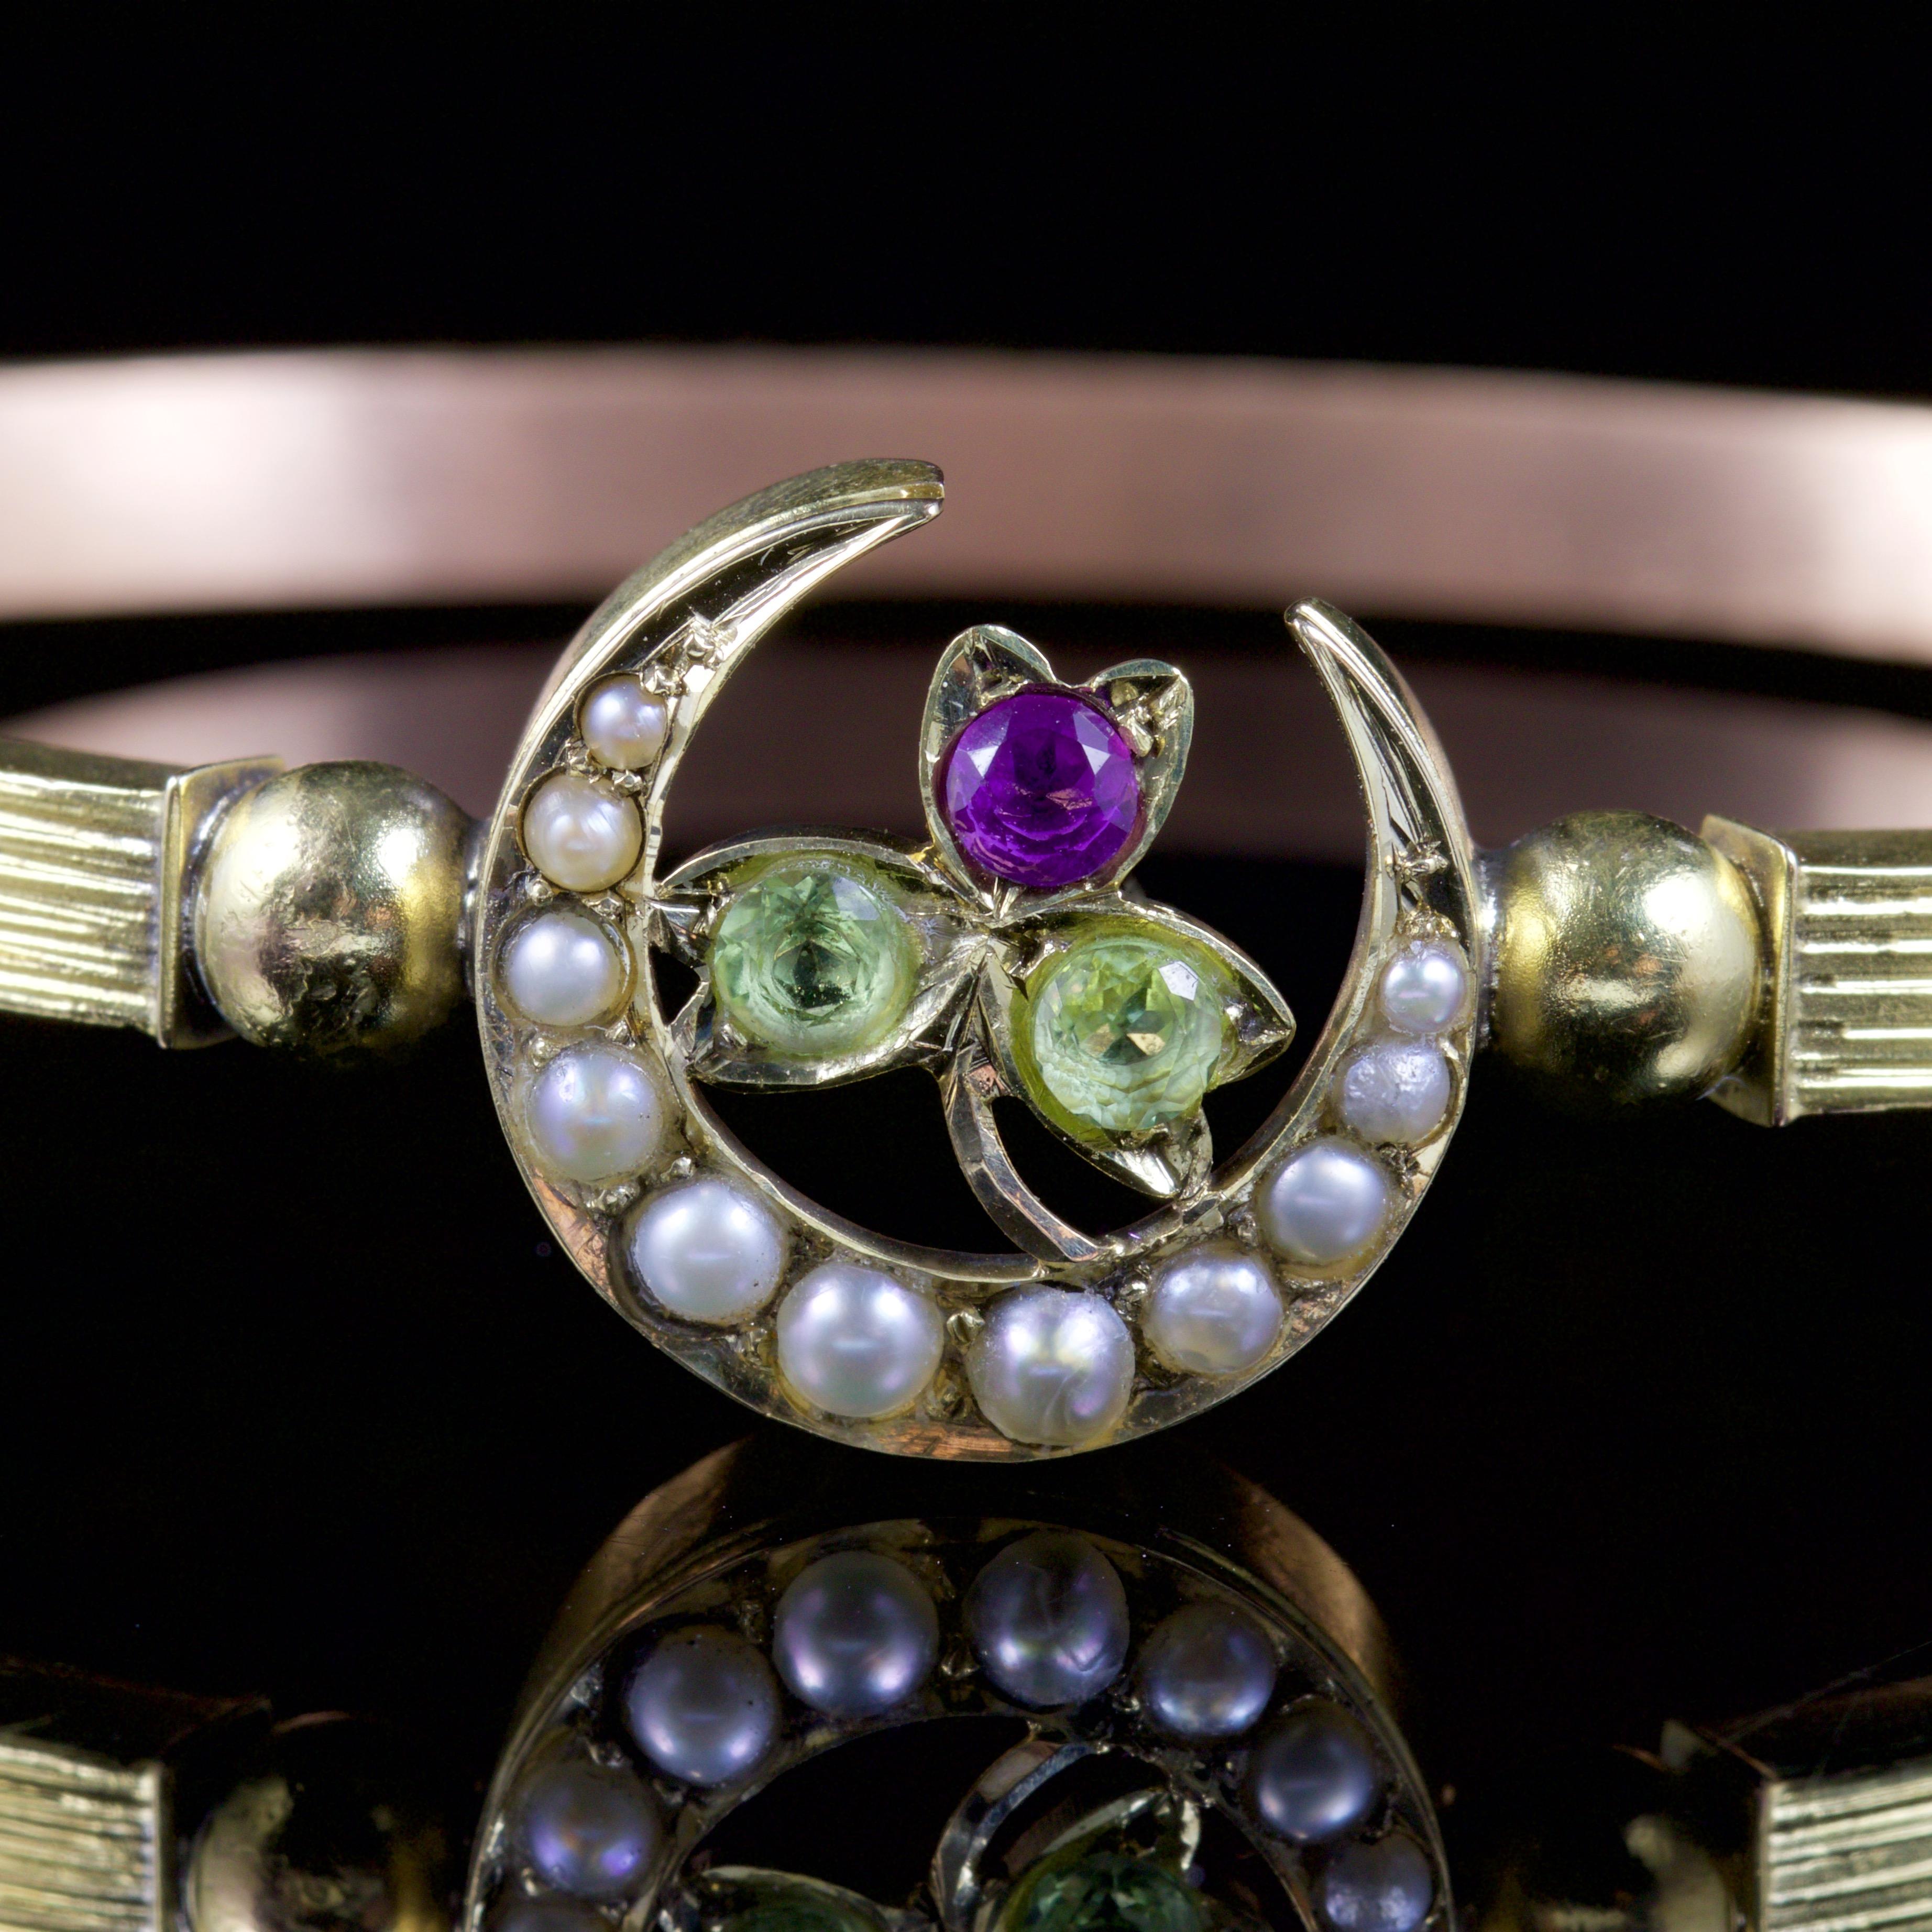 This Victorian Suffragette Bangle is set in 18ct Yellow Gold, Circa 1900.

An elegant Pearl crescent and an Amethyst, Peridot flower/shamrock adorns this fabulous Suffragette bangle.

Suffragettes liked to be depicted as feminine. Their jewellery